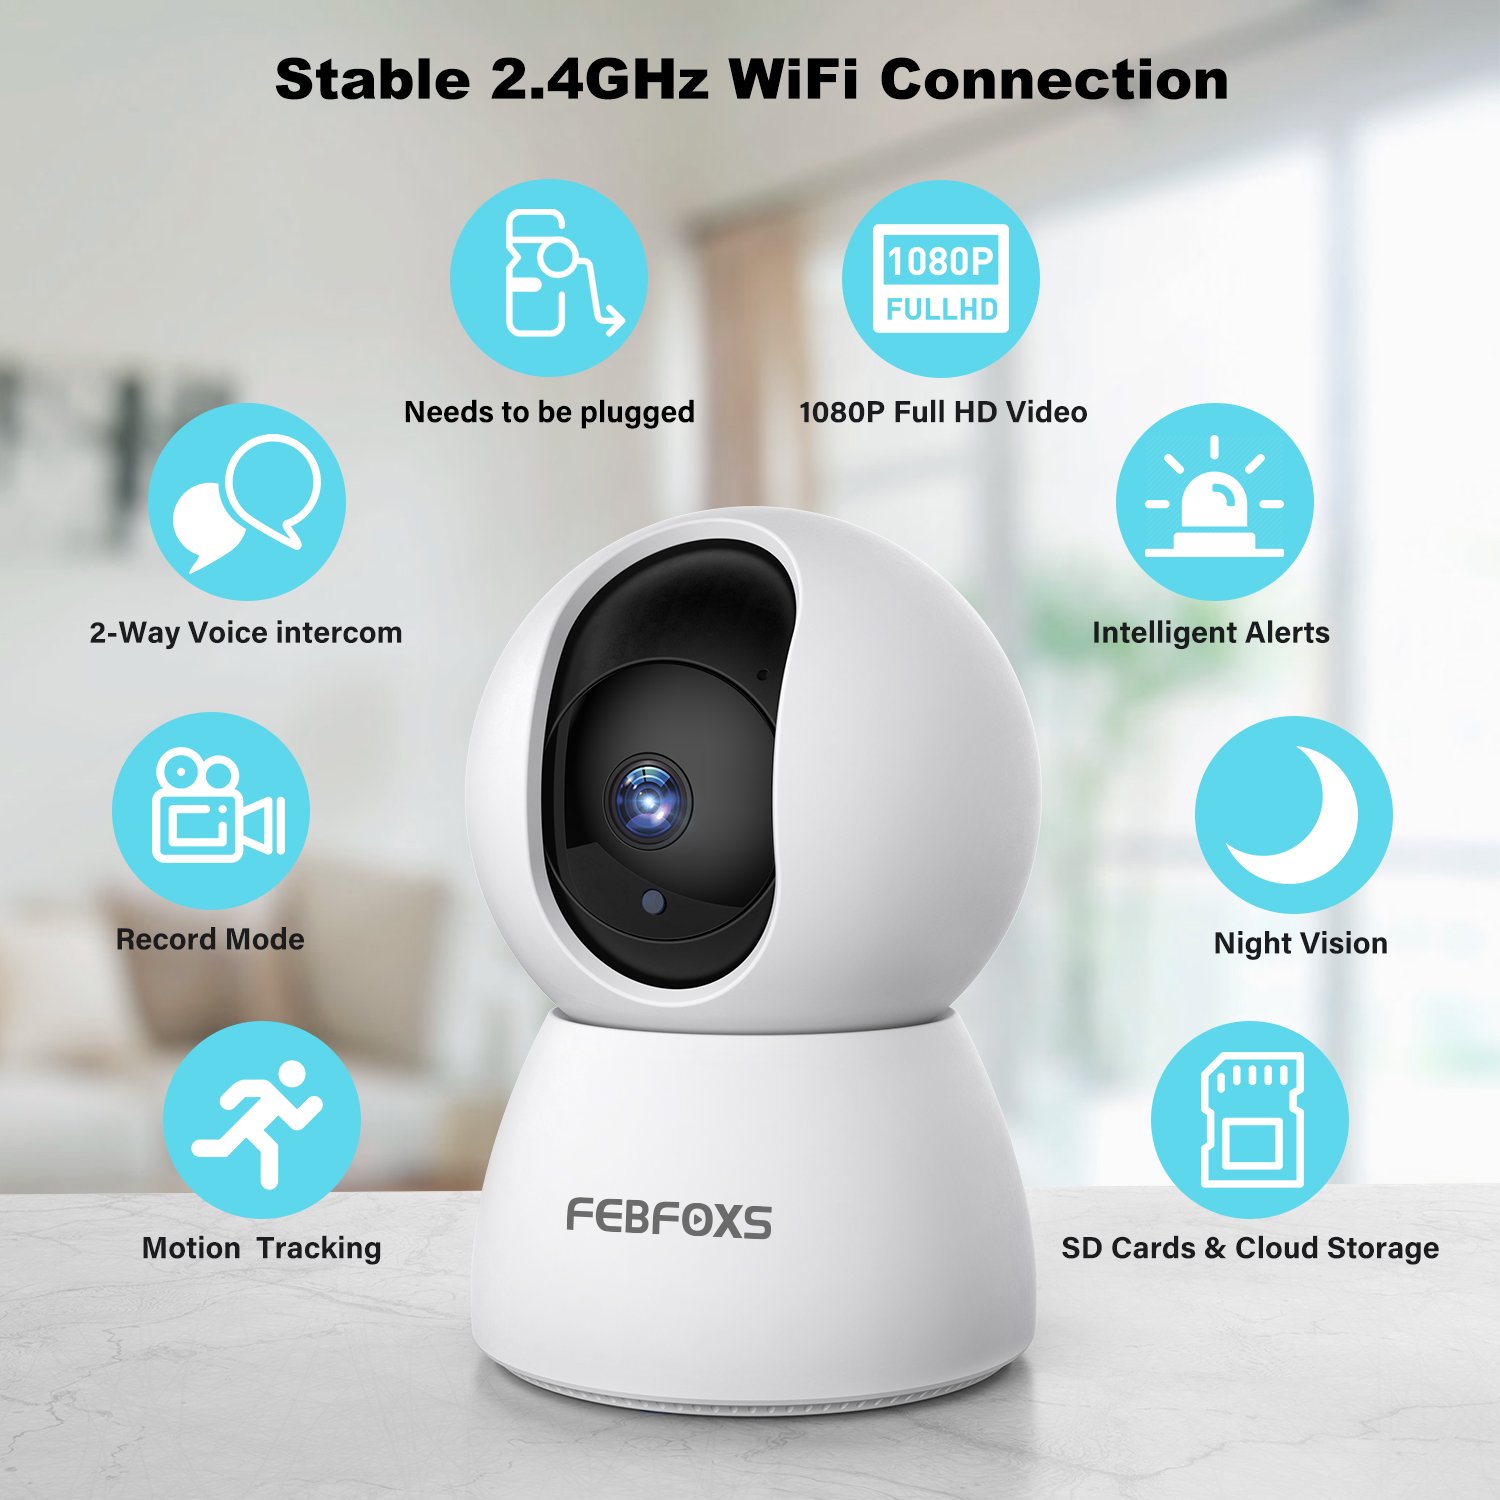 Febfoxs D305 Baby Monitor Security Camera for Home Security - image 7 of 7